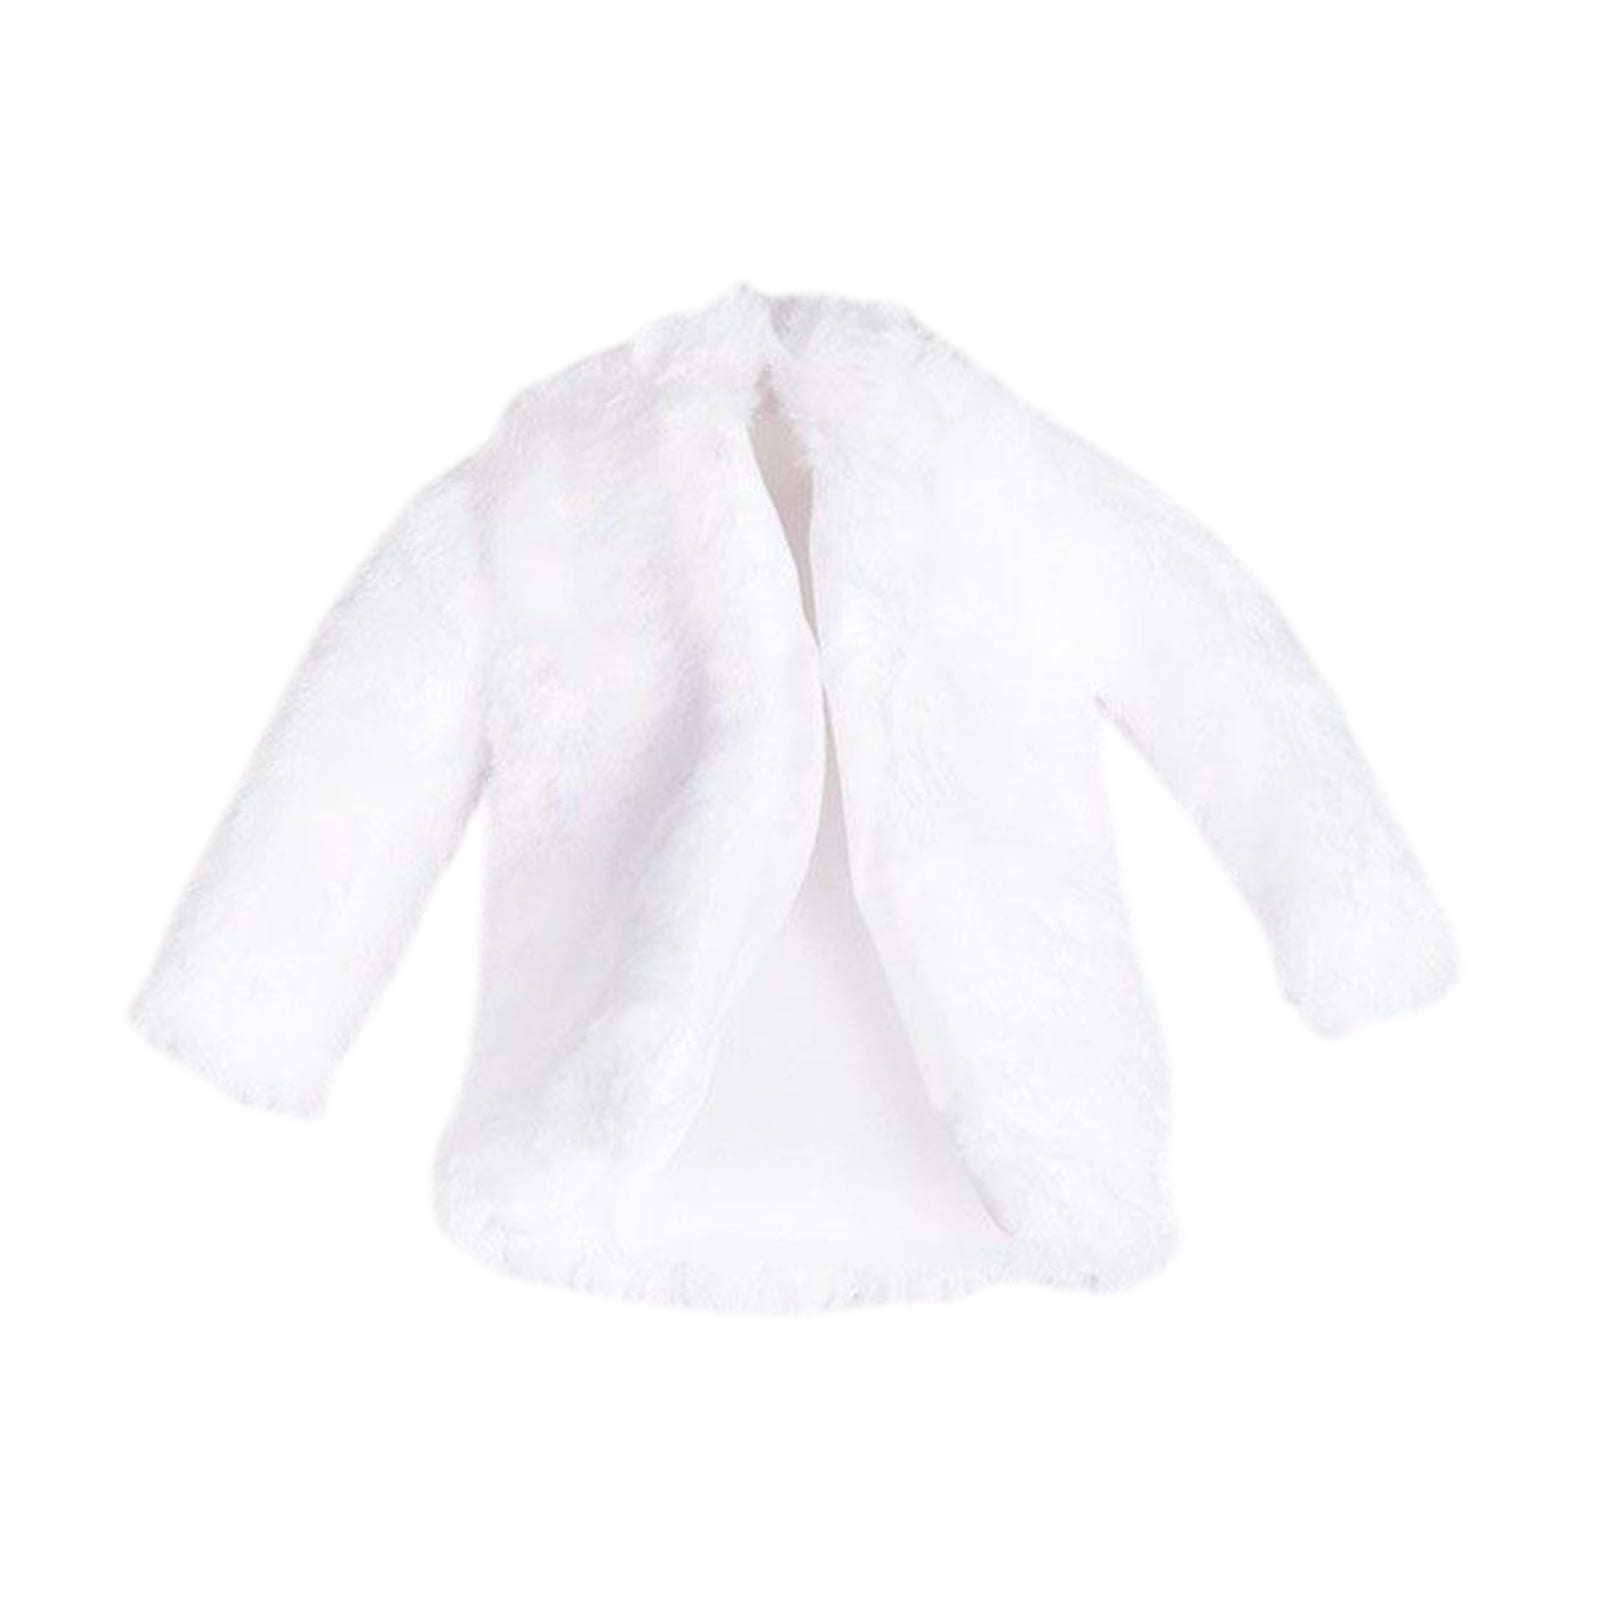 Details about   Custom 1:6 Scale Figure Clothing White Fur Coat For 12" Female Body Doll 